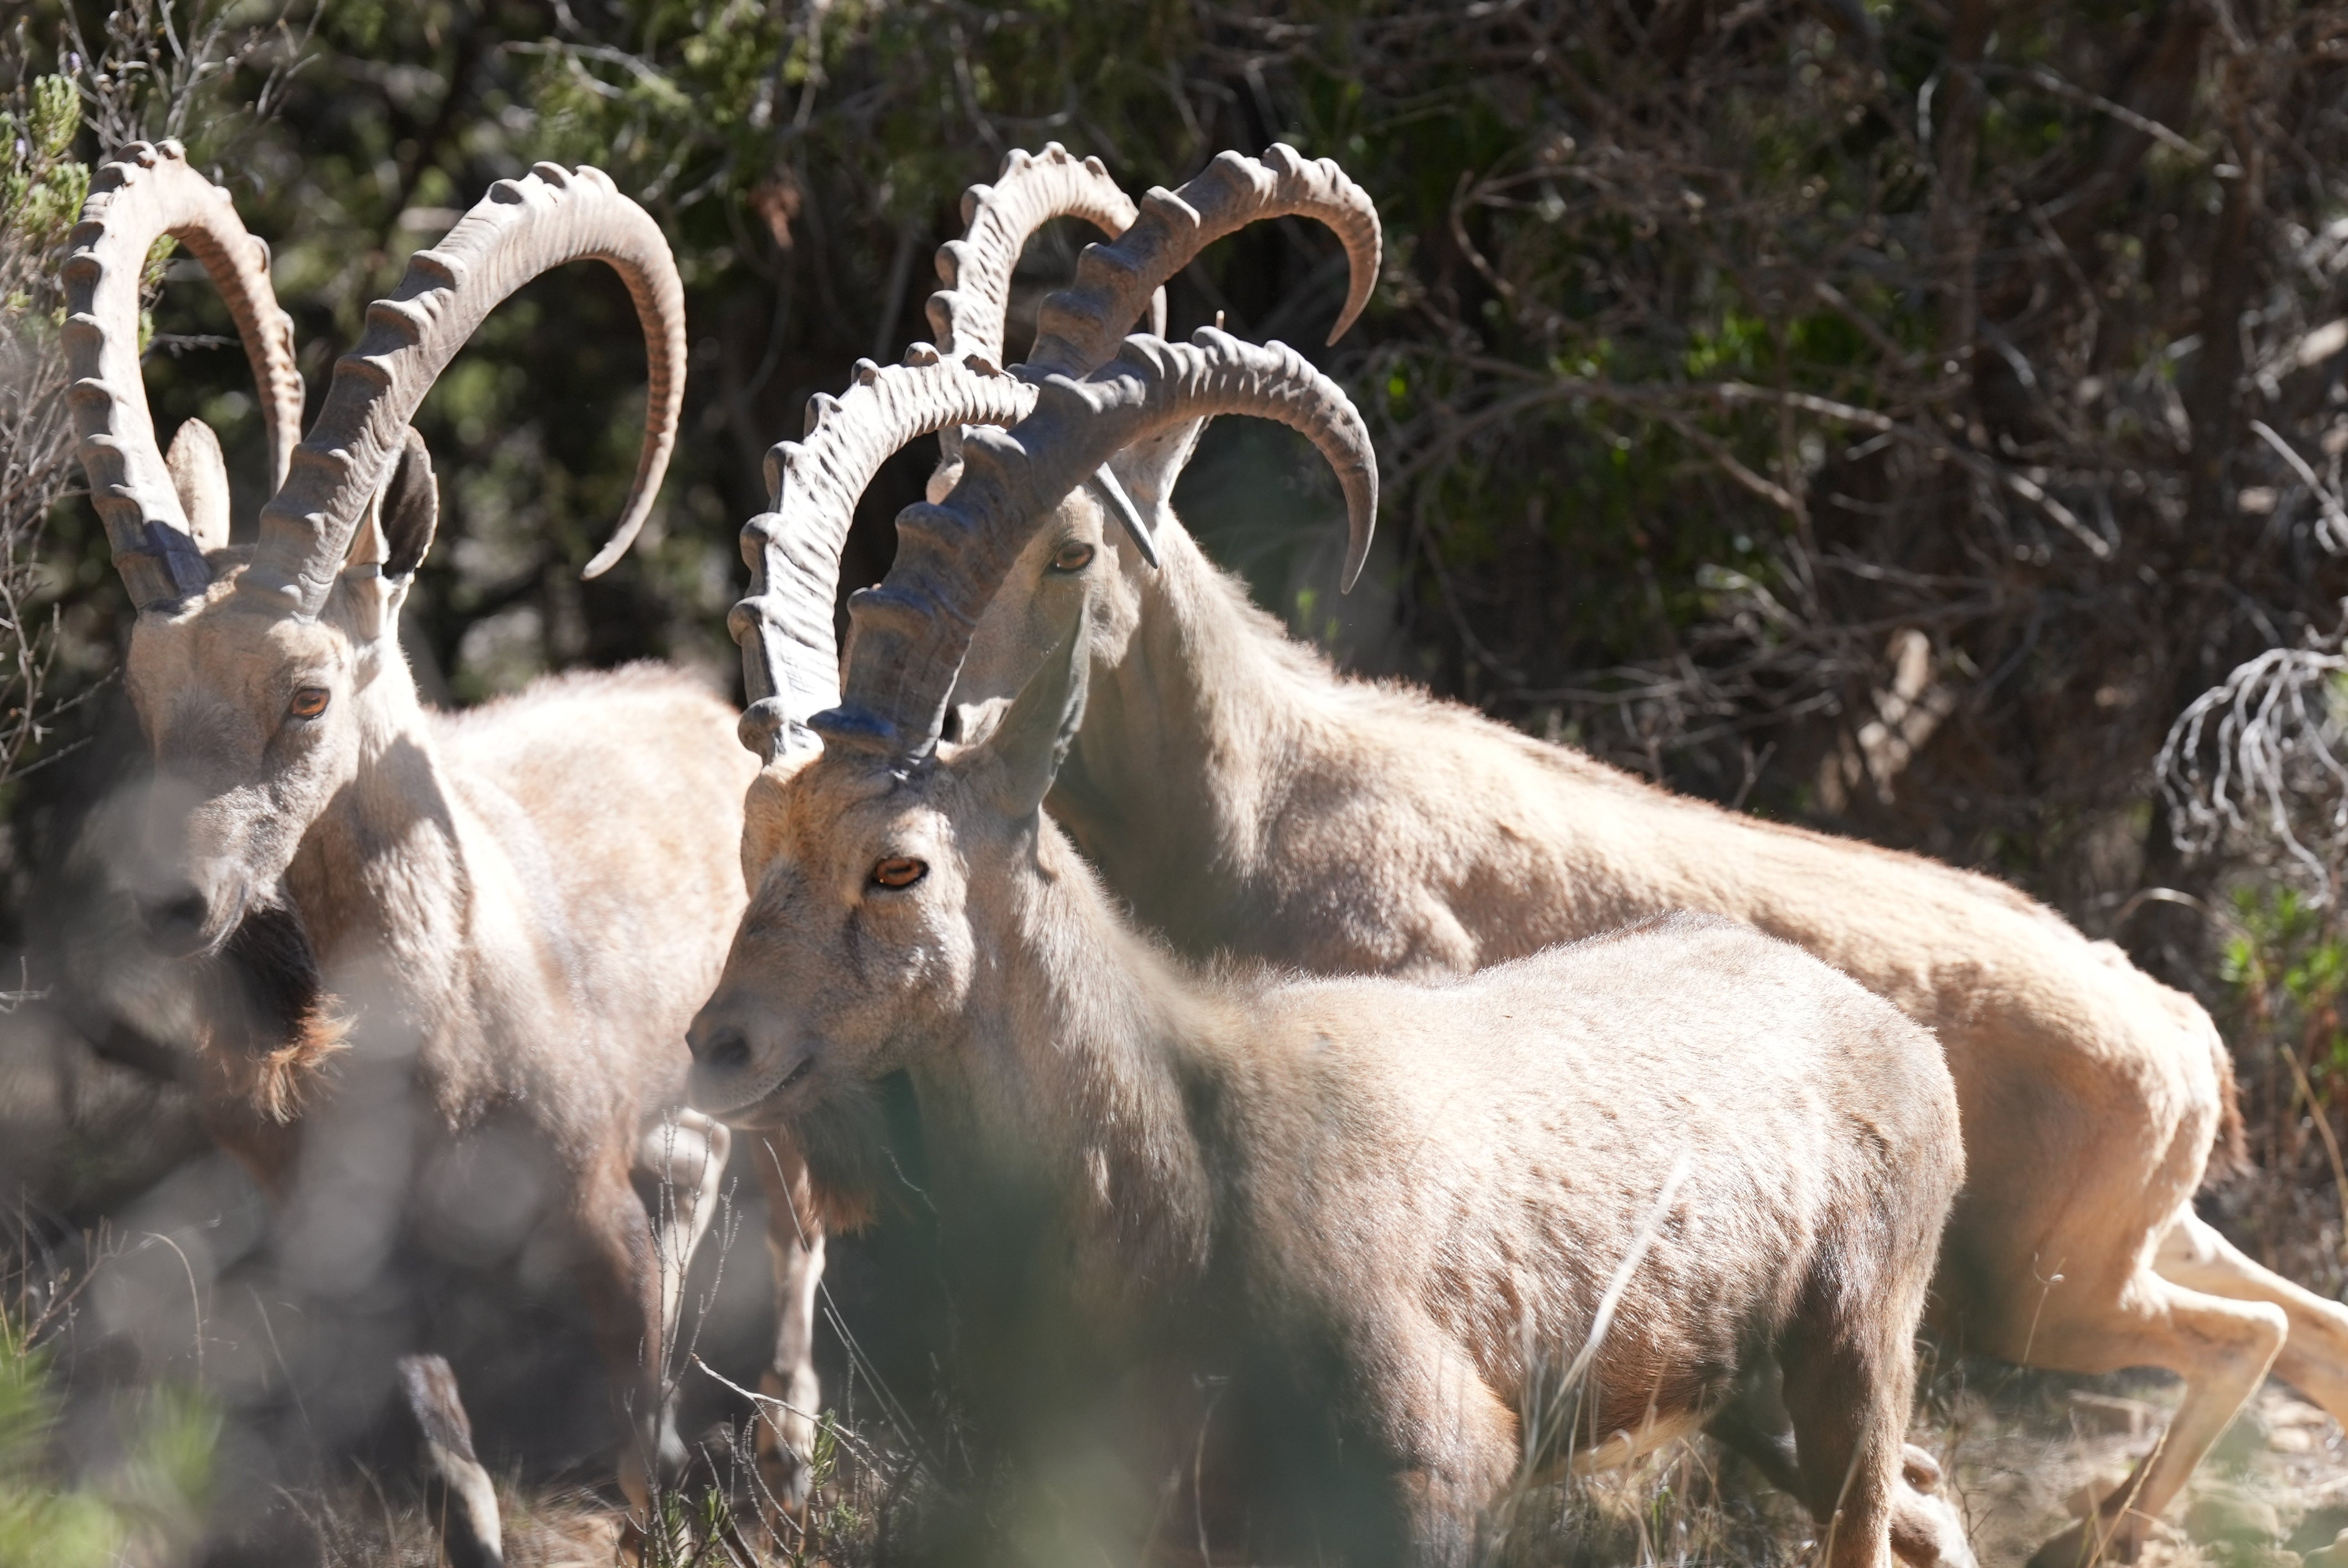 Ibex, which are being reintroduced to the wilds of Soudah